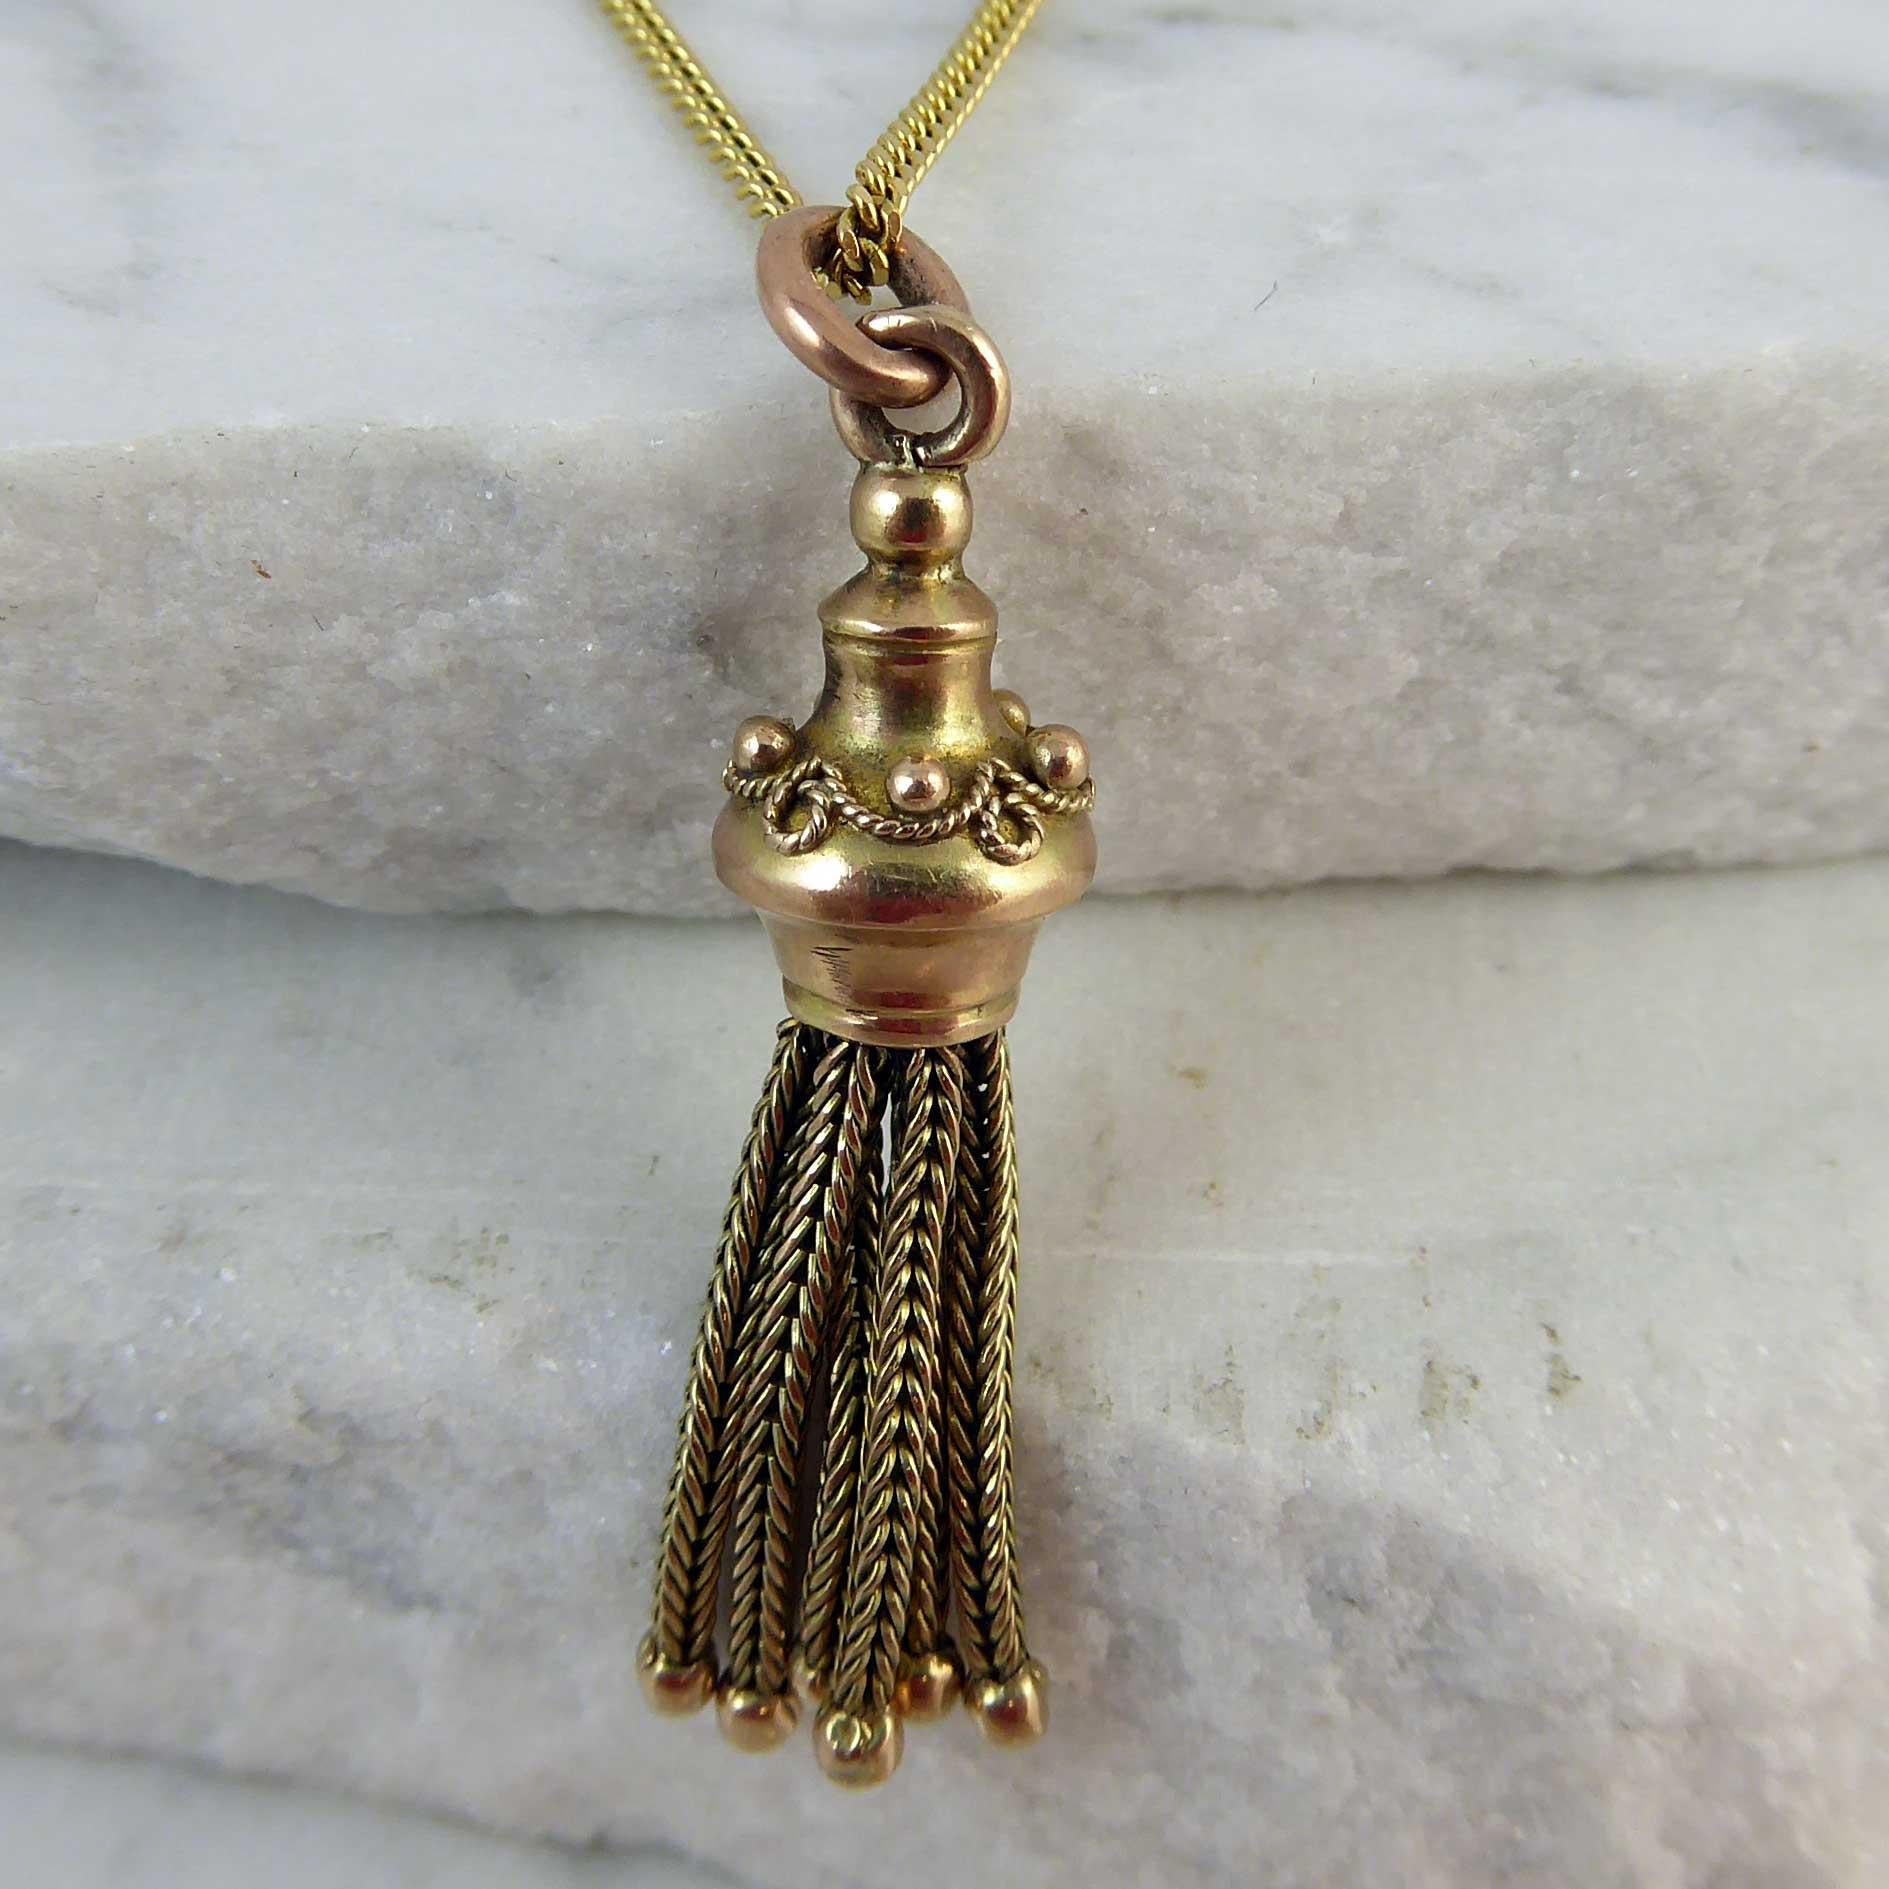 Women's or Men's Antique Victorian Gold Tassel Pendant with Modern Chain, 9 Carat Yellow Gold